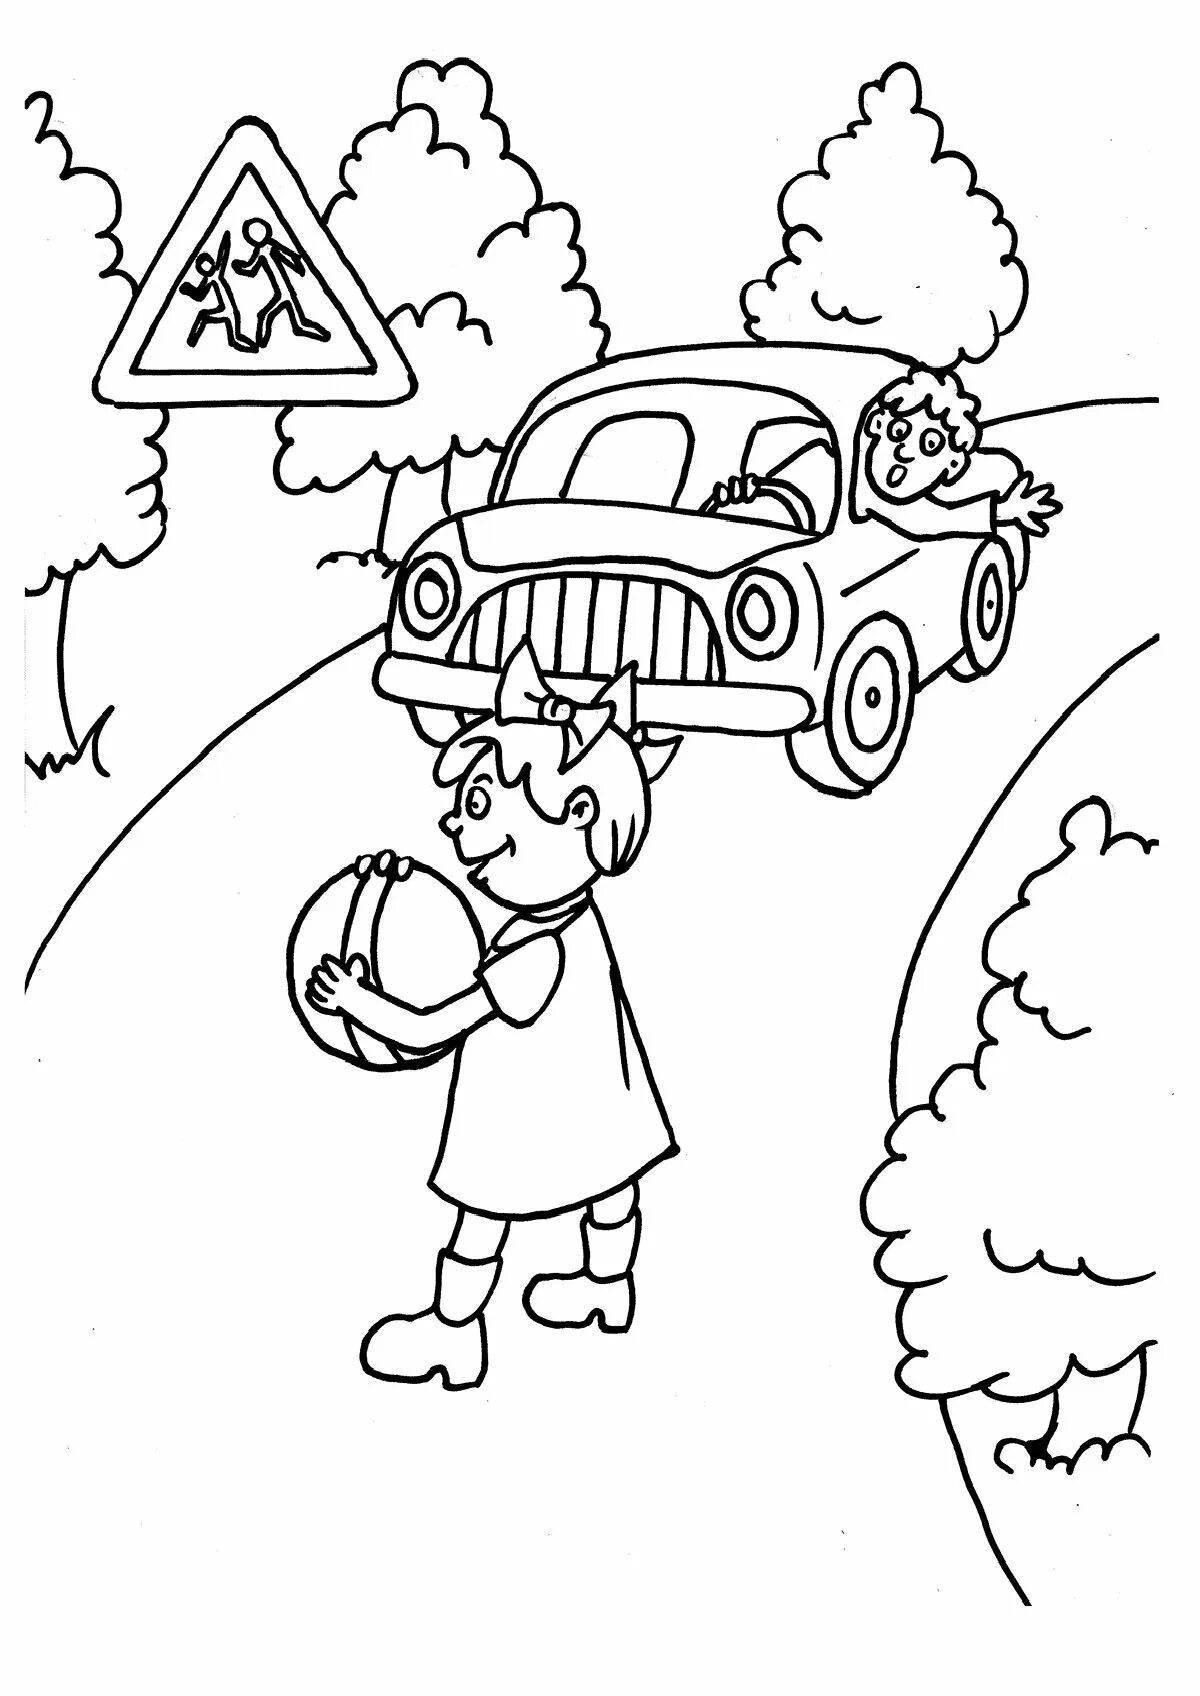 Adorable 1st grade traffic rule coloring book